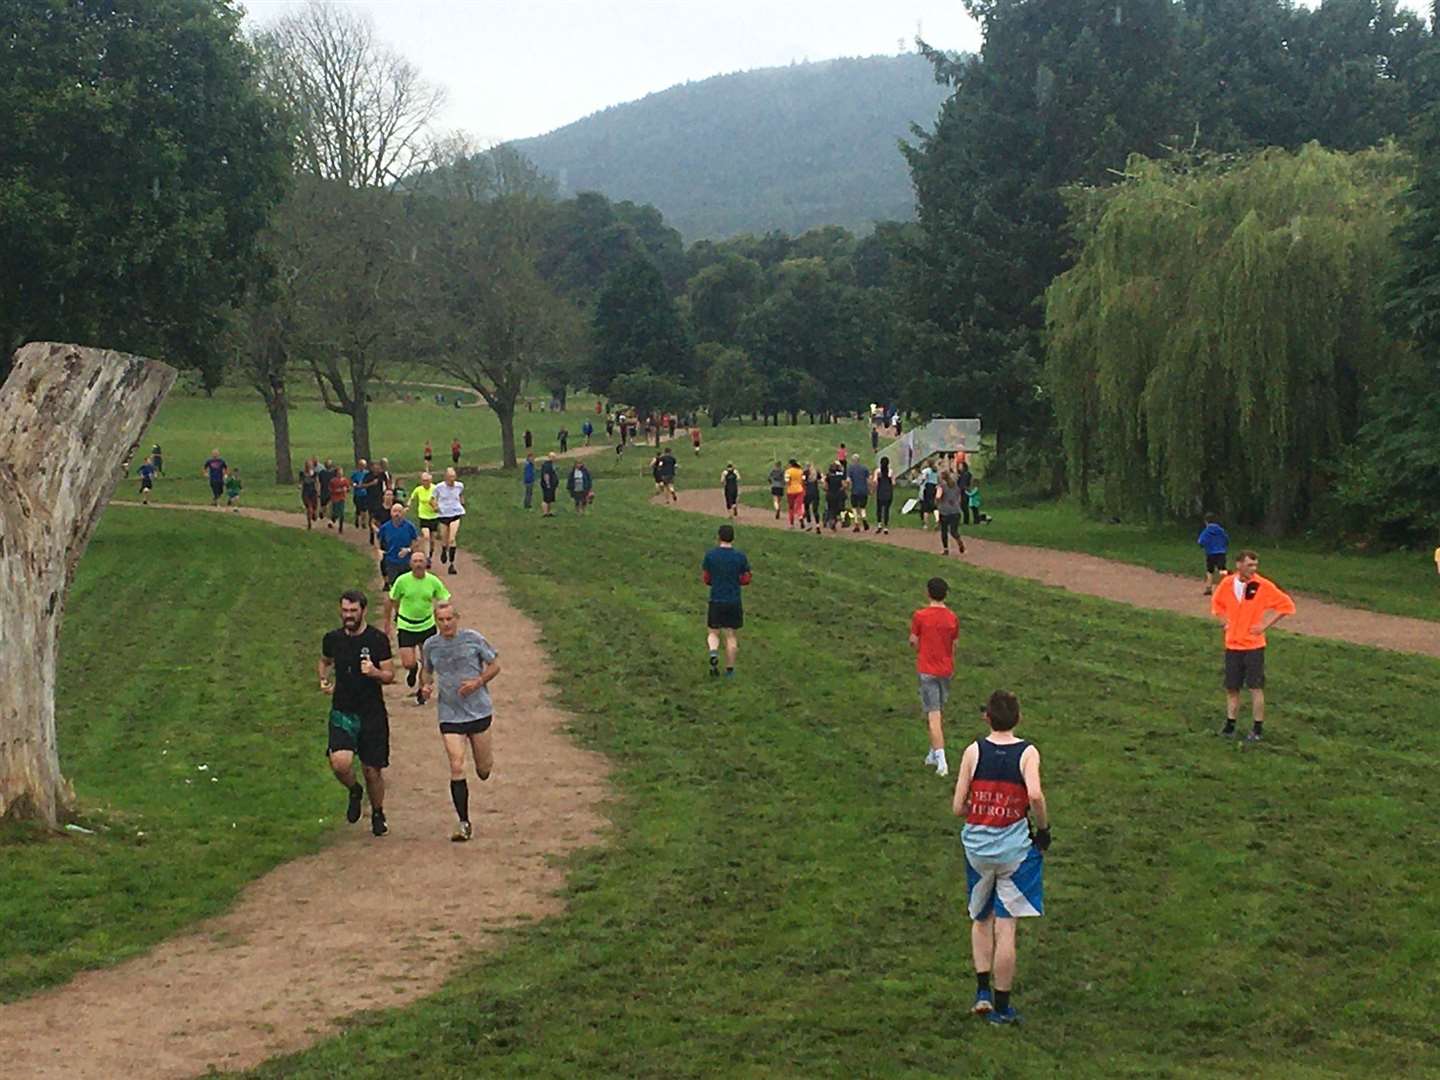 The Parkrun course follows two-and-a-half loops of the path at the new park.